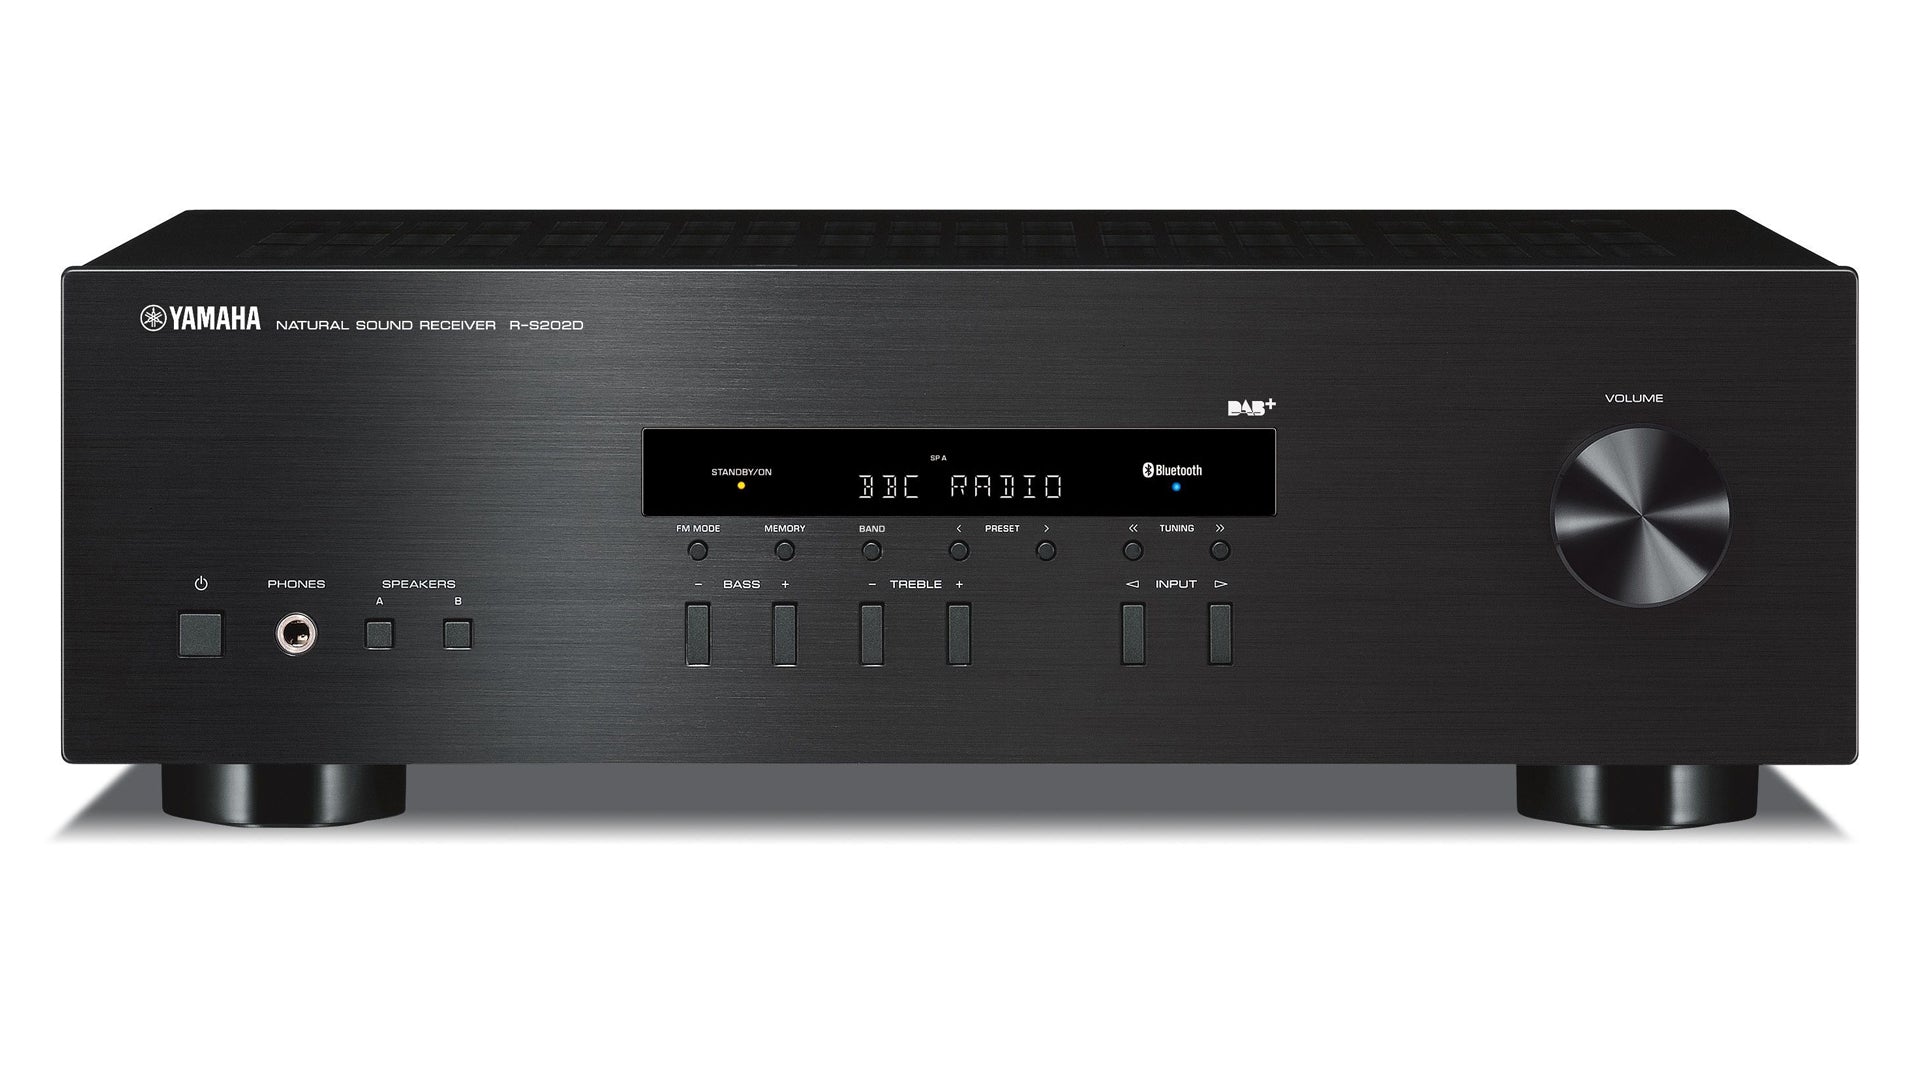 Yamaha R - S 202 Stereo Receiver